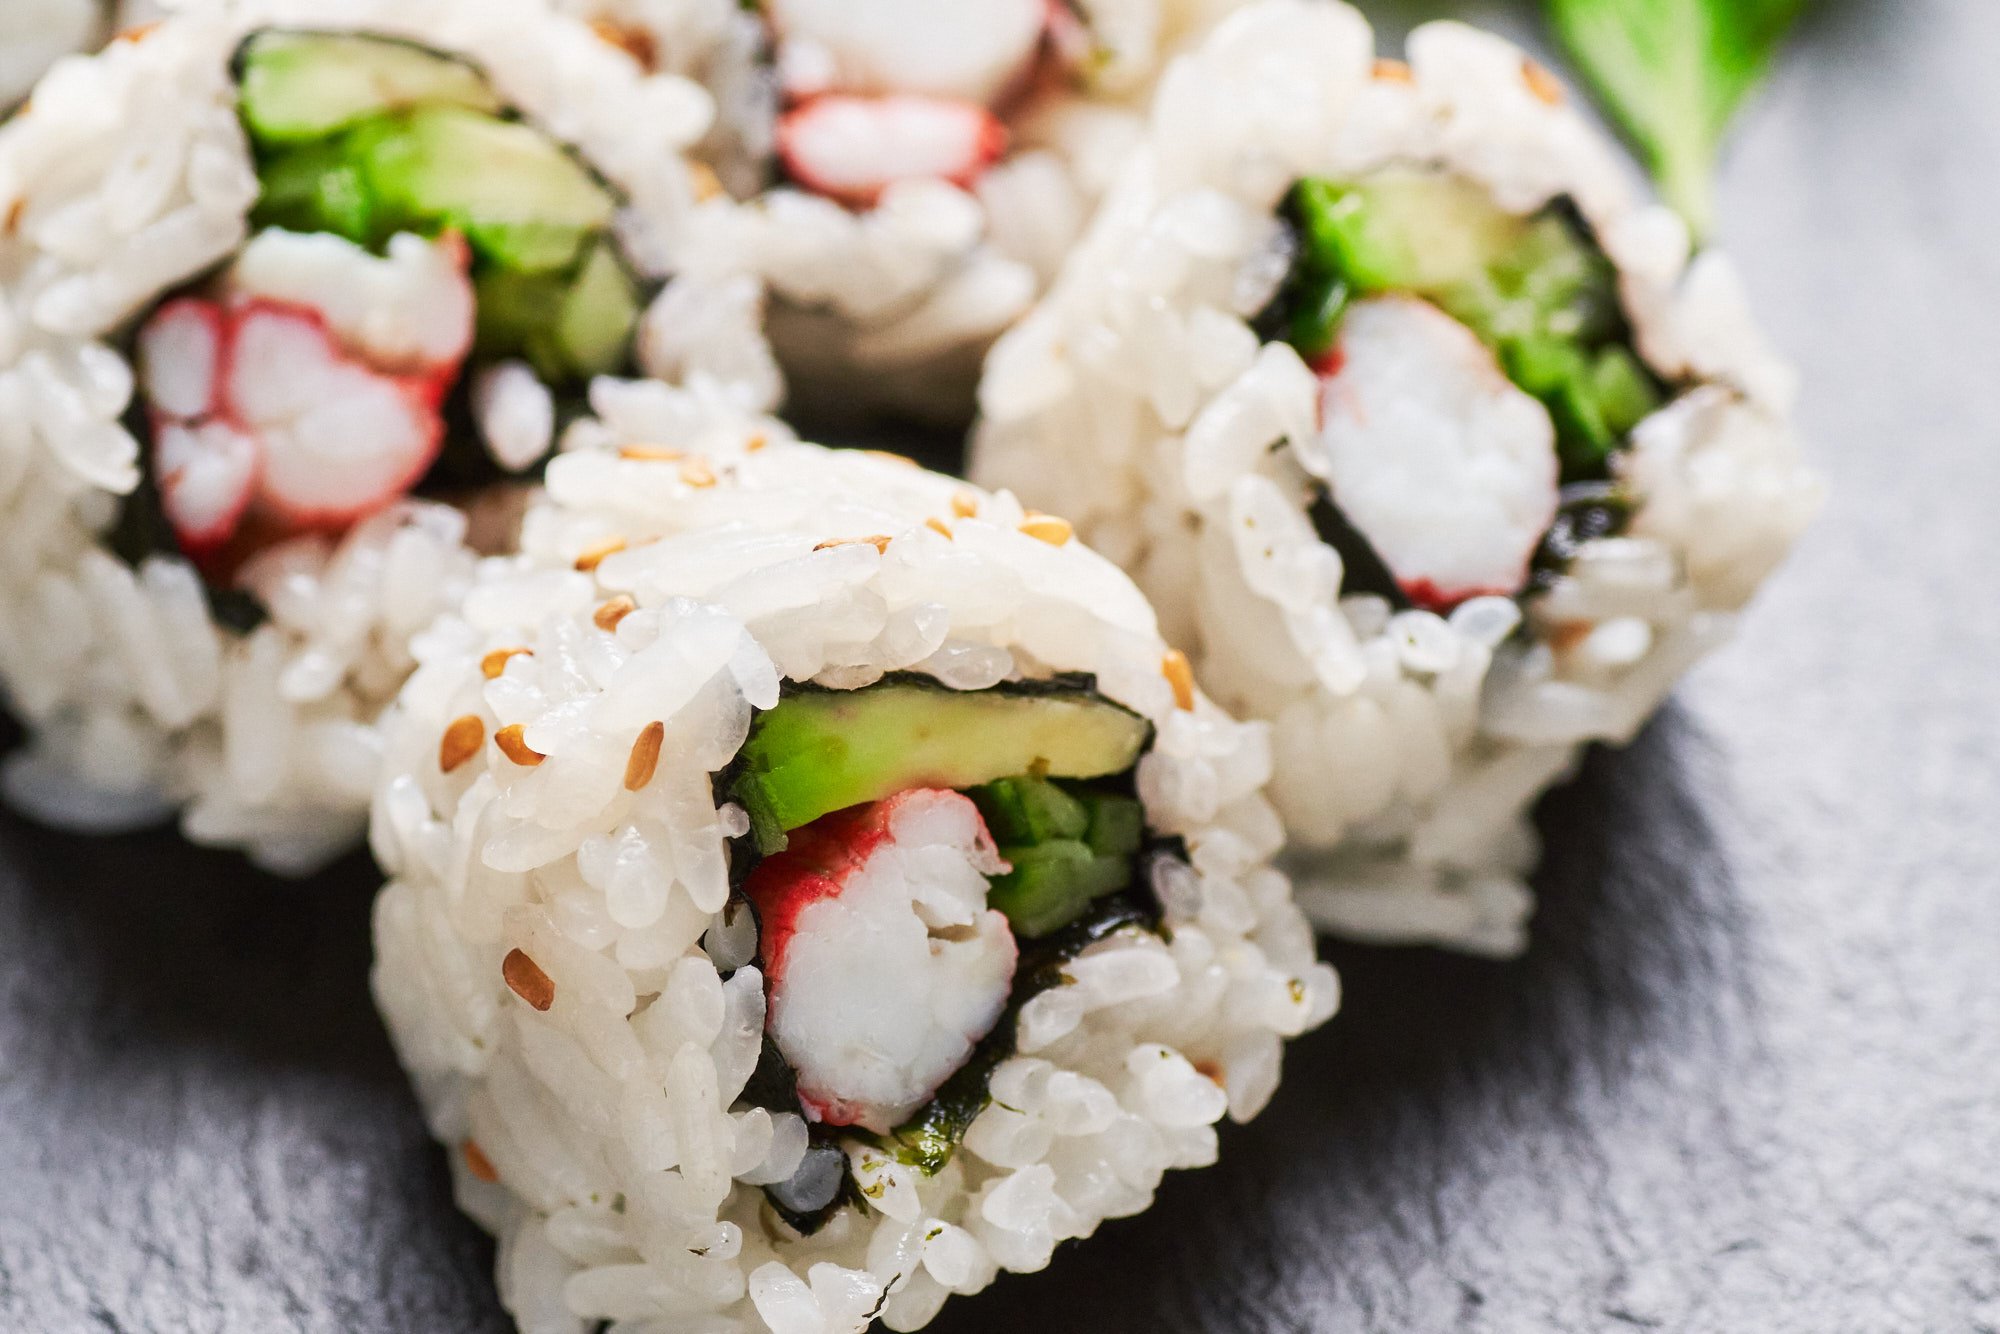 With creamy avocado and flavorful king crab, this California Roll recipe is easy and delicious!